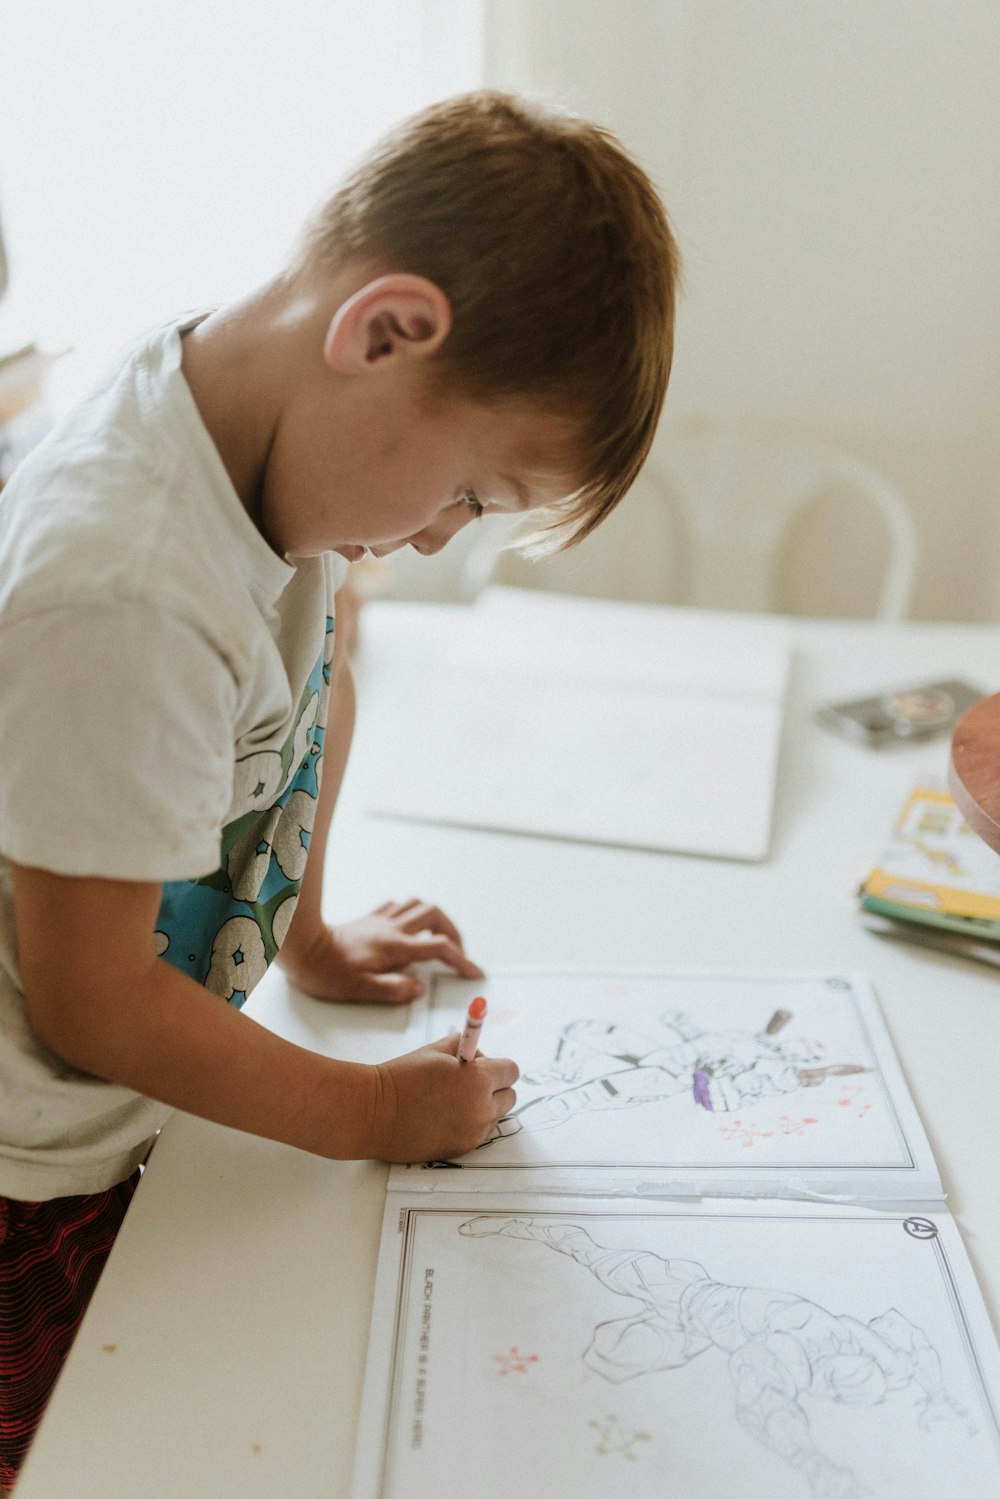 a young boy drawing on a white board